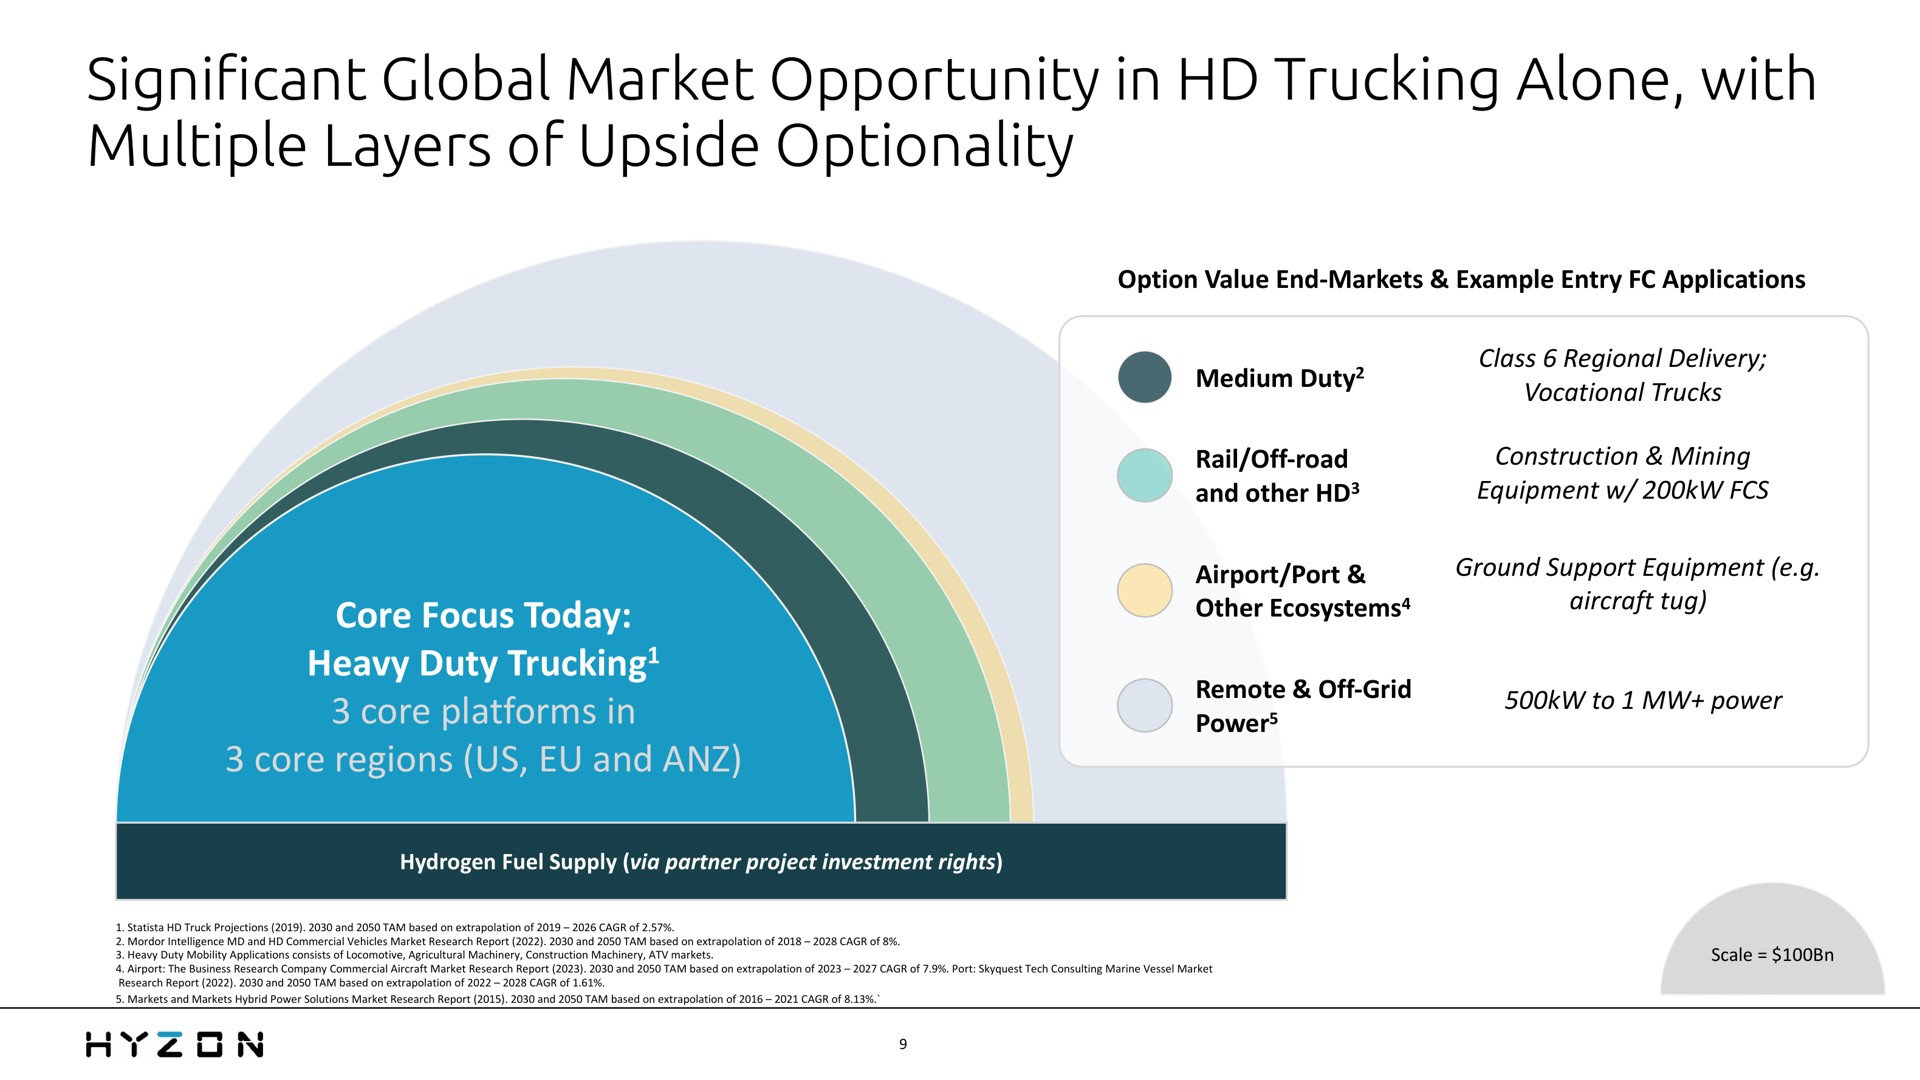 significant global market opportunity in trucking alone with multiple layers of upside optionality | Hyzon